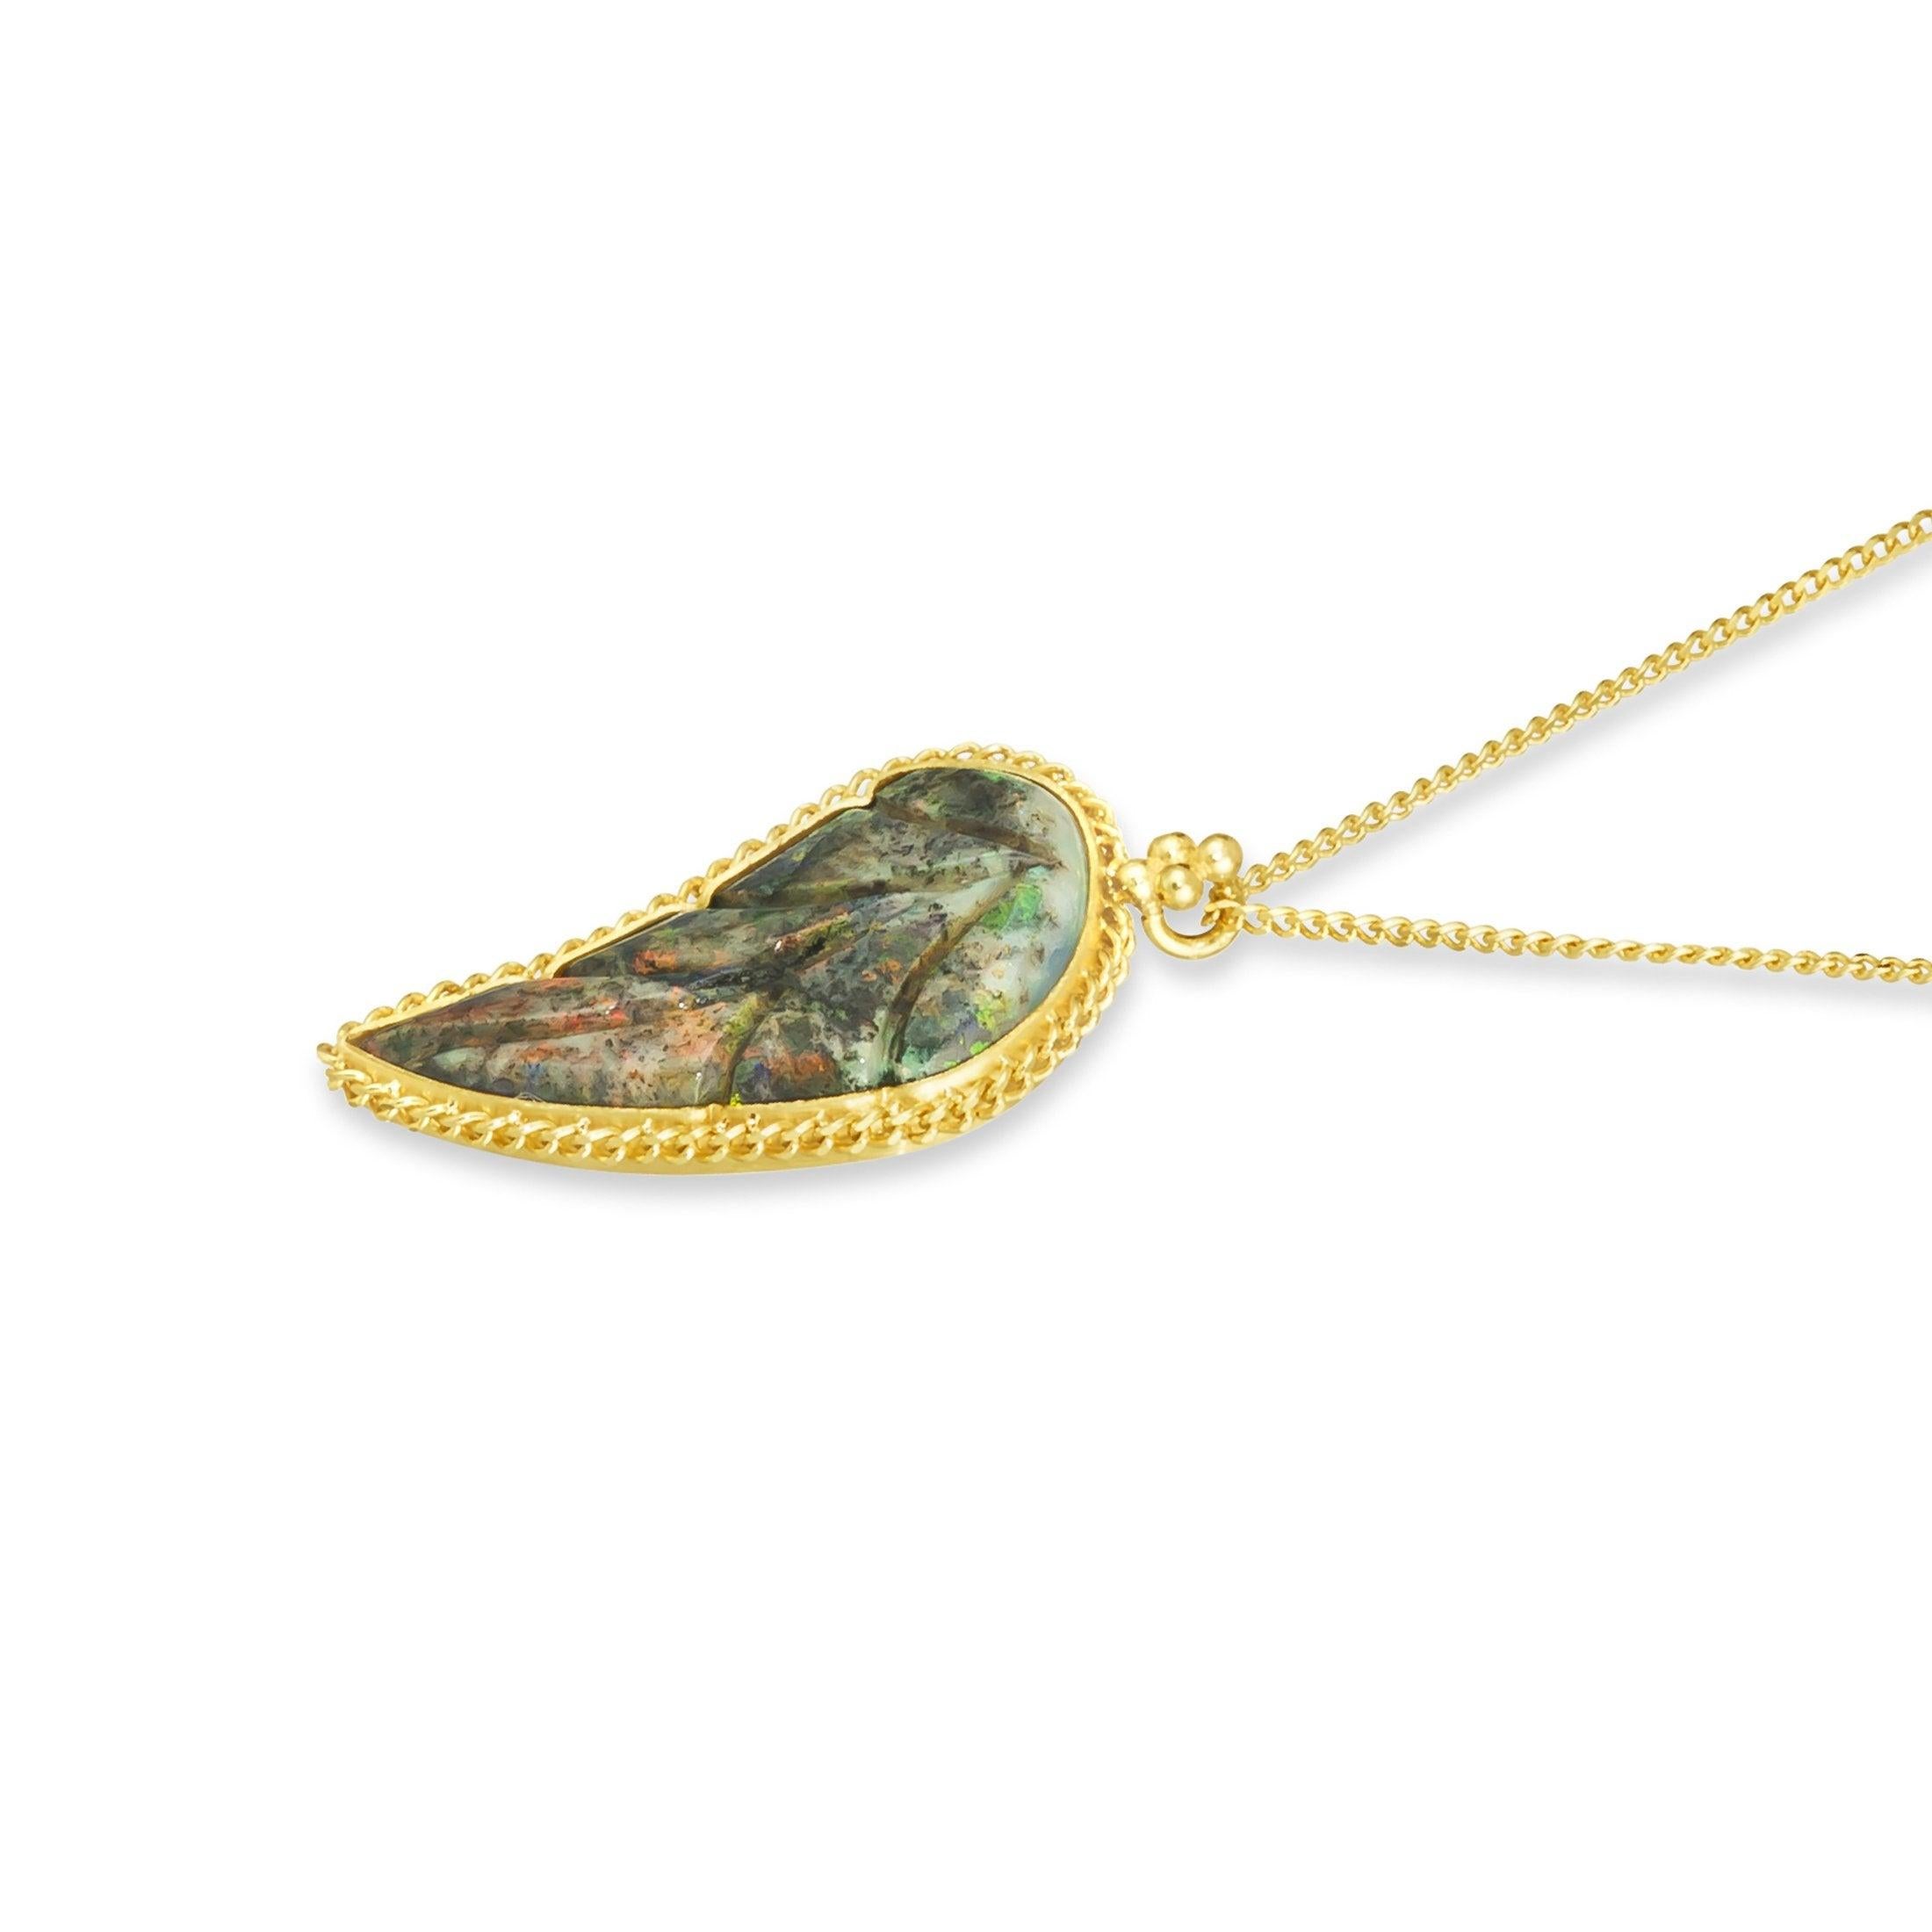 The shifting colors of this carved Andamooka Opal call to mind the lushness of sunlight dancing across an untouched forest floor. The creamy background is alive with swirling moss green hues, punctuated with flecks of darkness and bright touches of